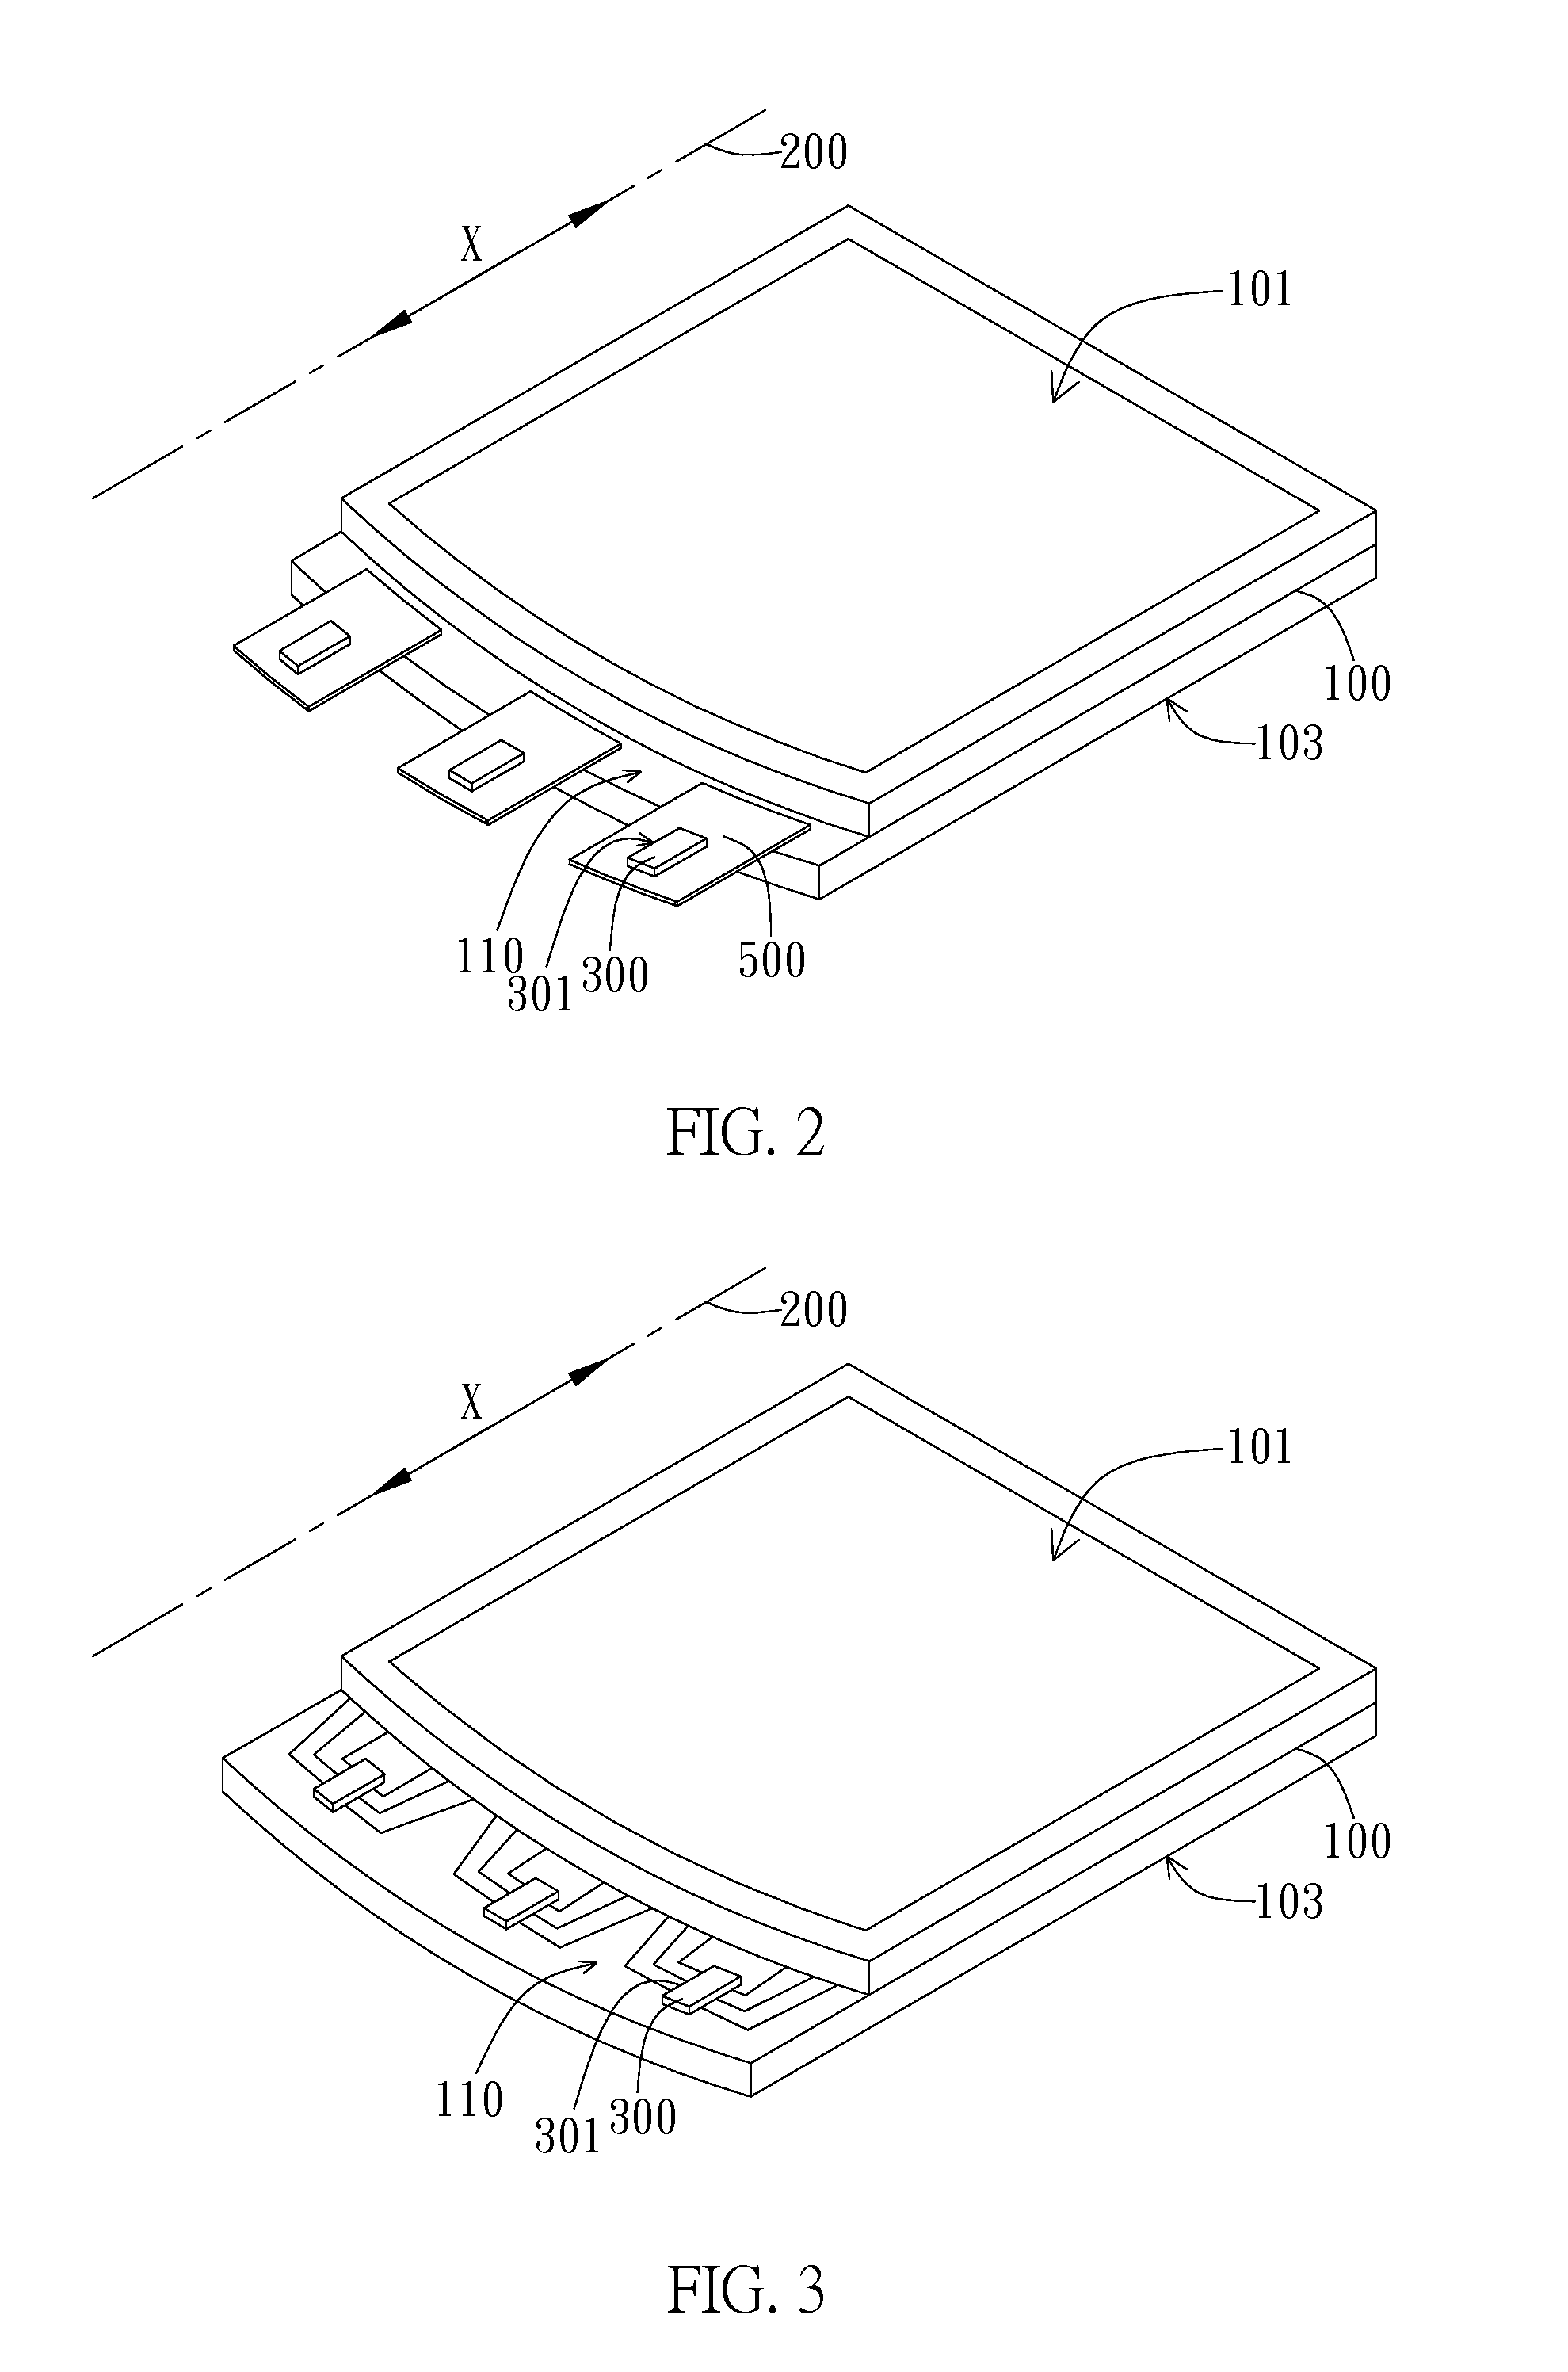 Display Module with Curved Surface